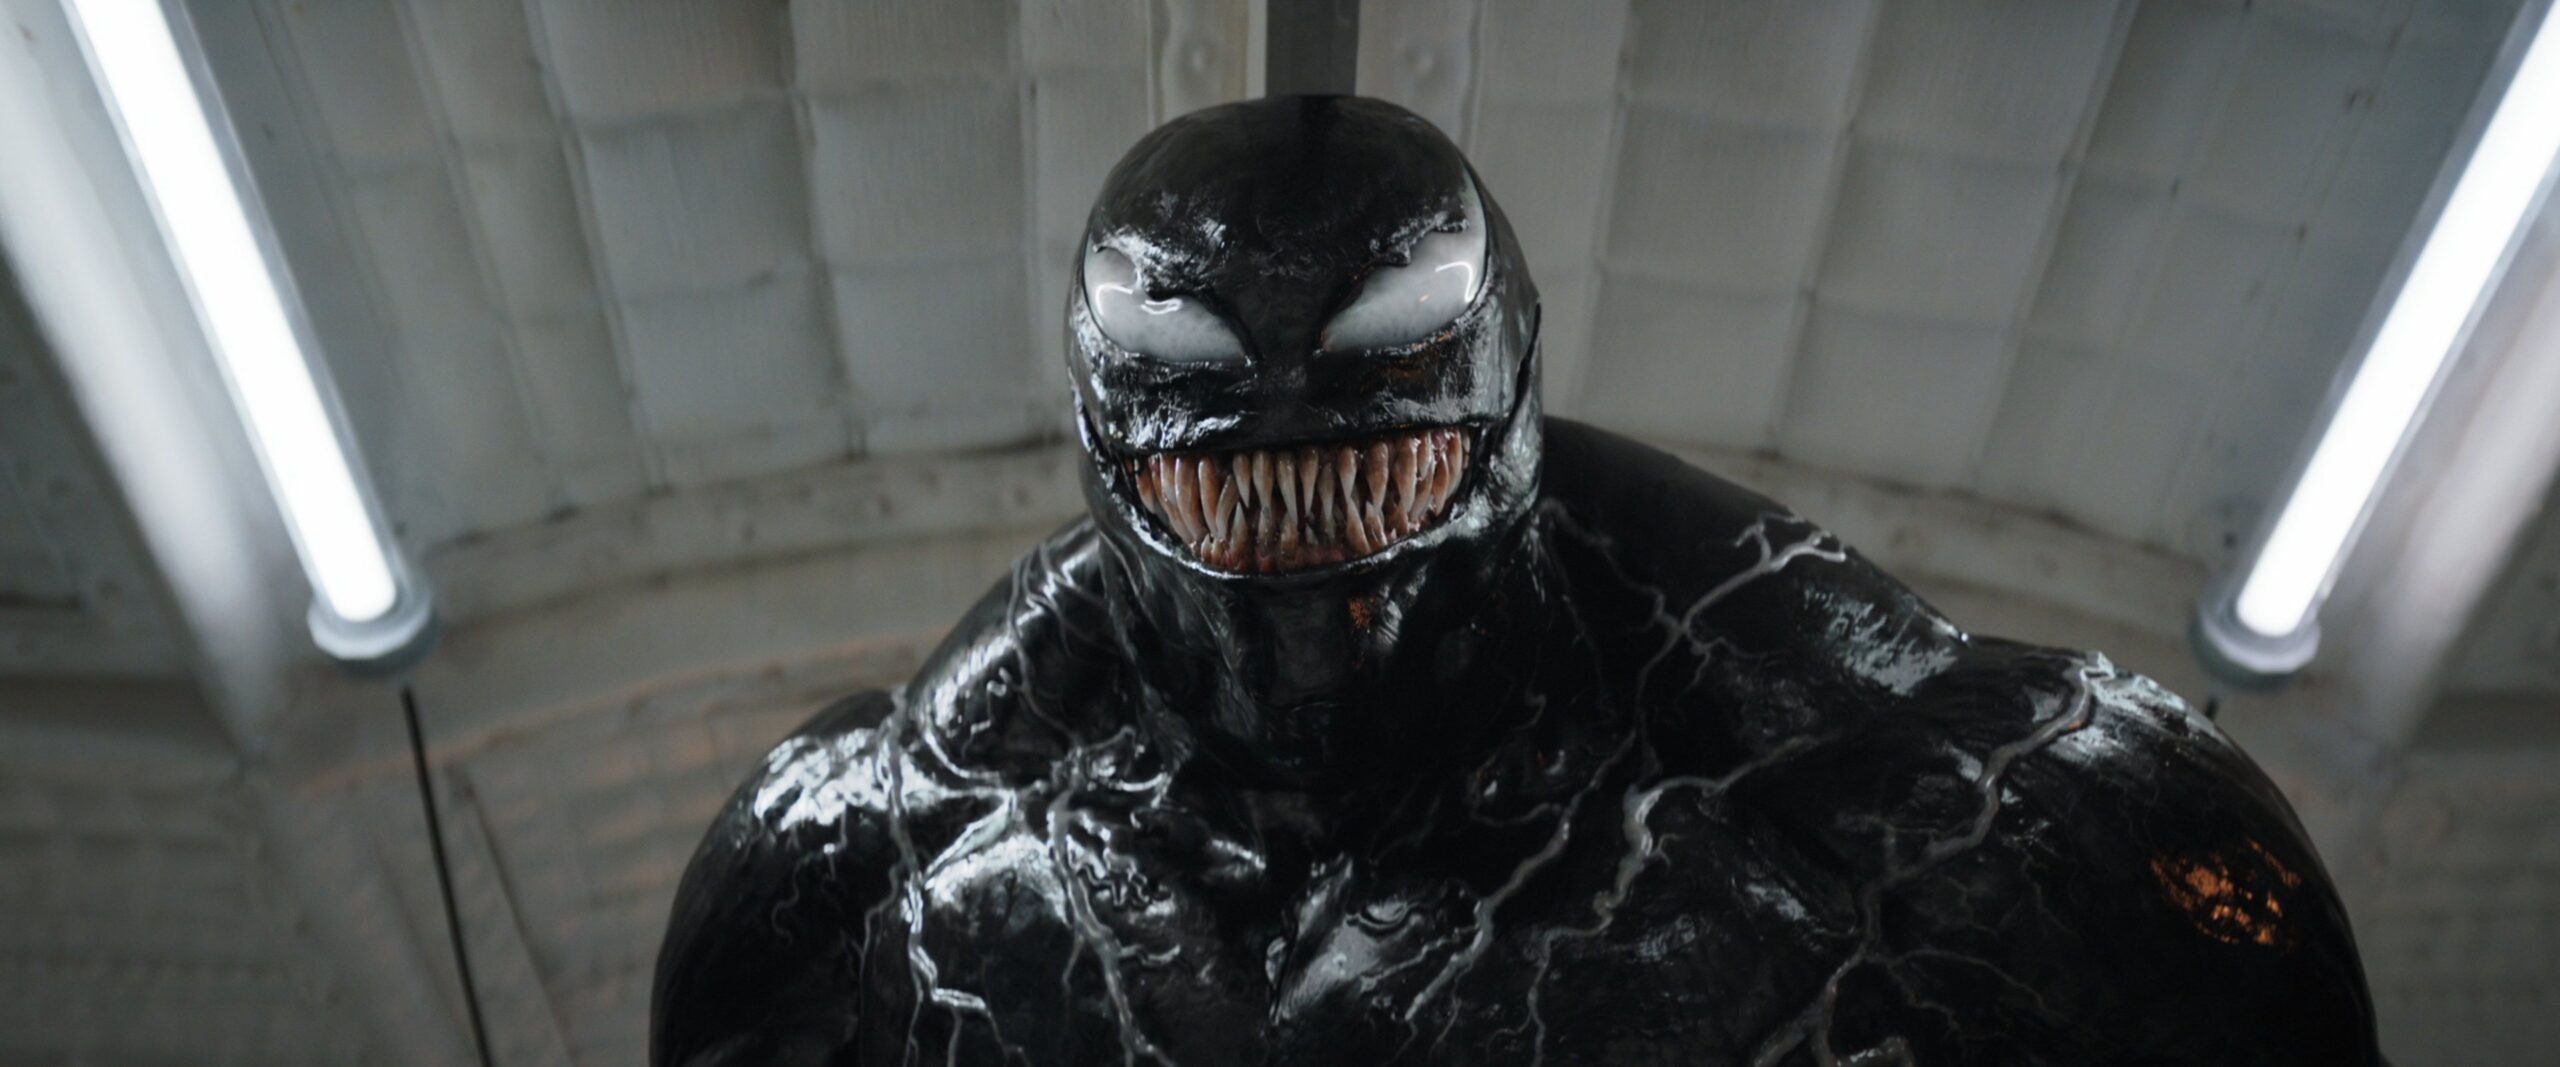 'Venom: The Last Dance' To Be Longest Film In Sony Spider-Man Universe (Exclusive)